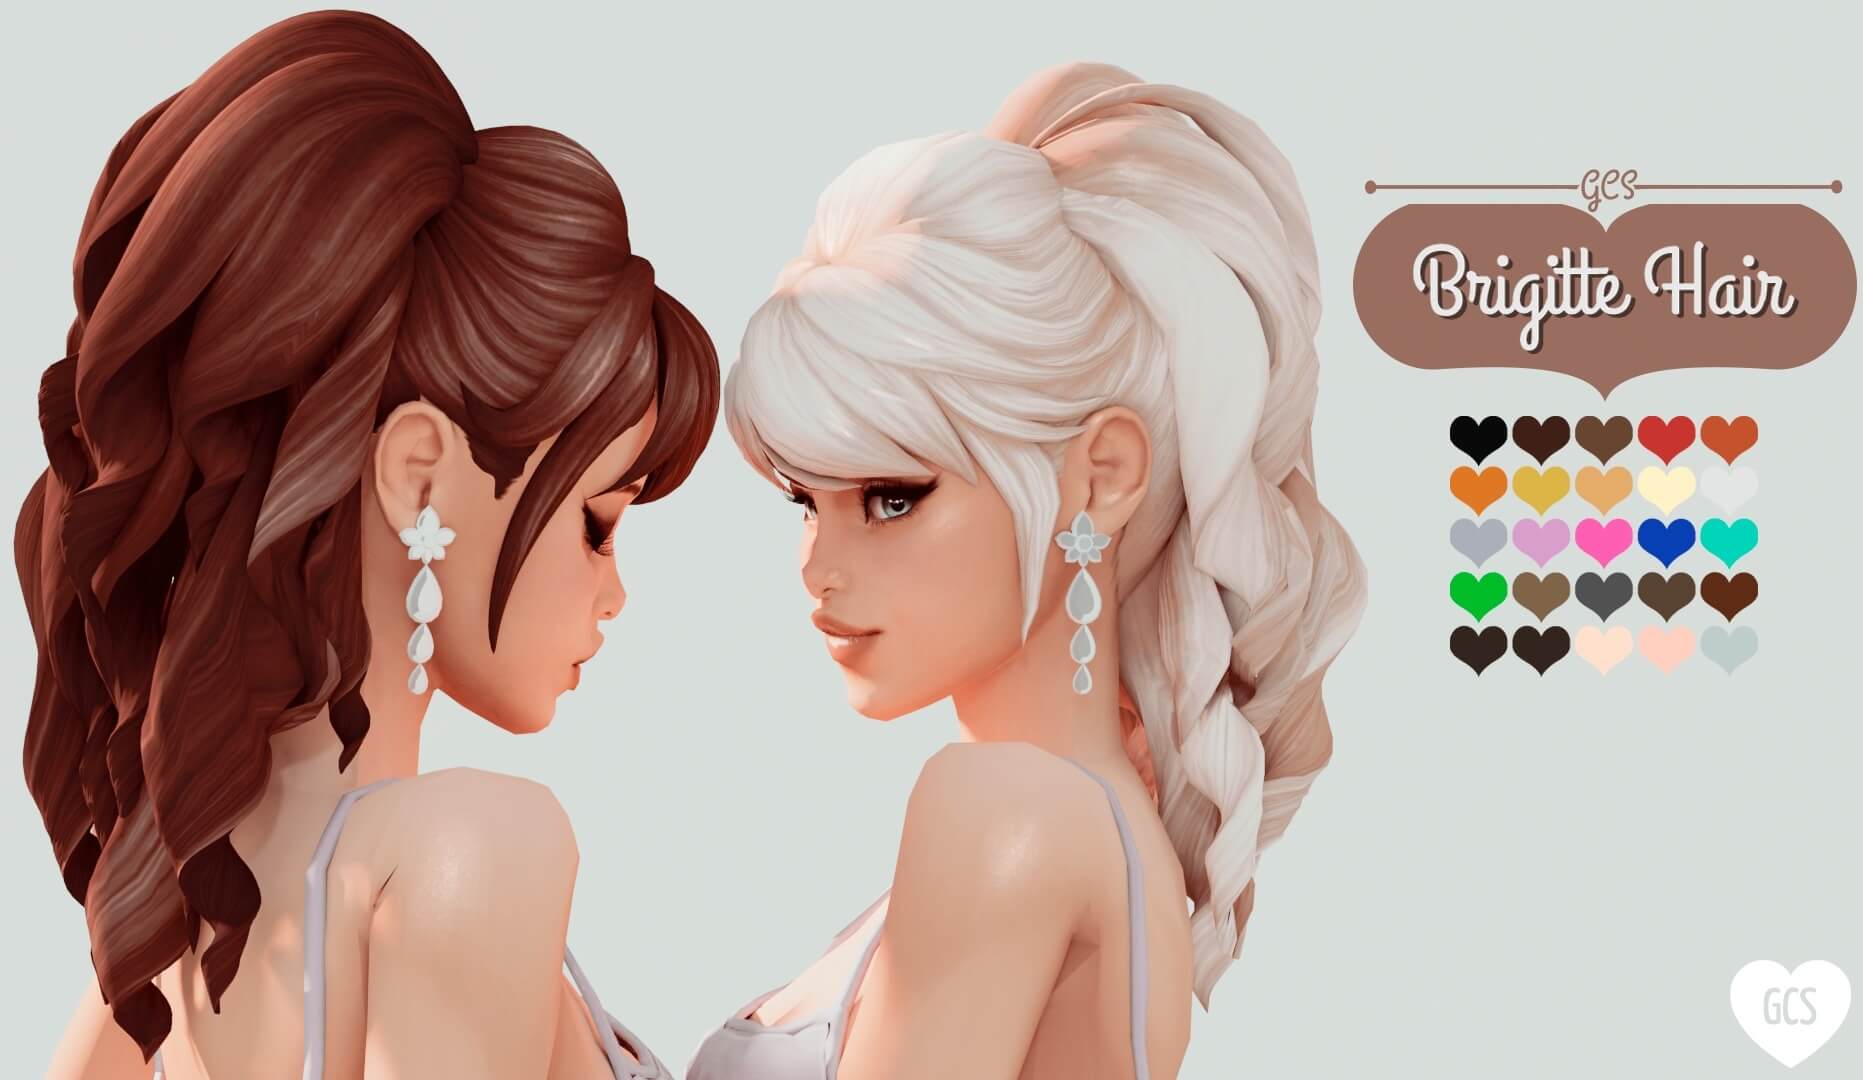 Sims 4 Maxis Match Hairstyle Micat Game